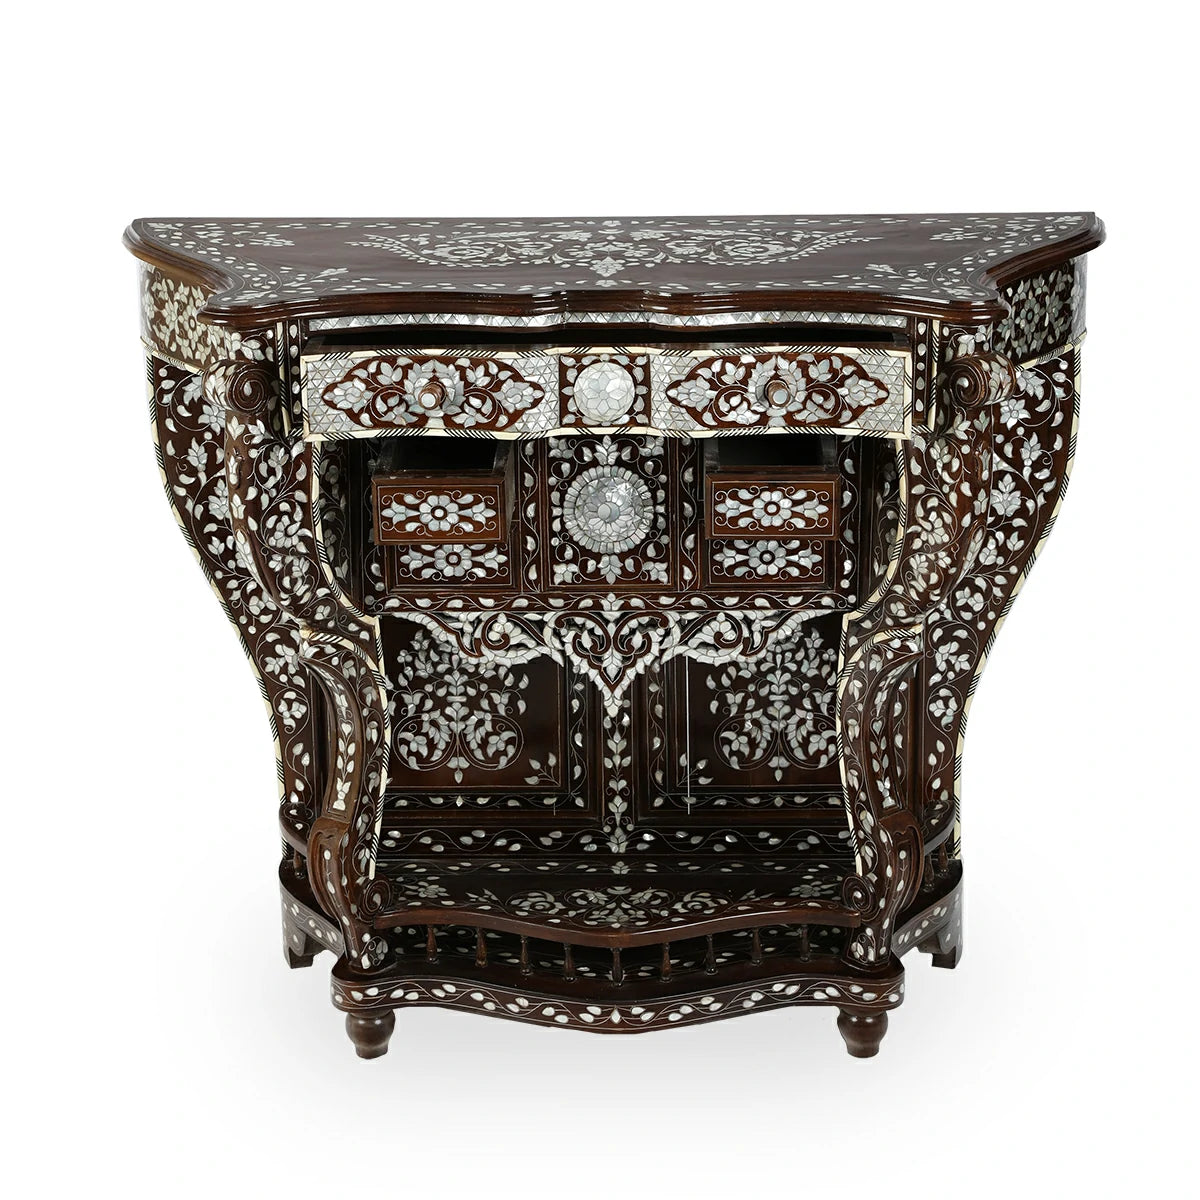 Top Angle Straight VIew of Arabic Design Console Table